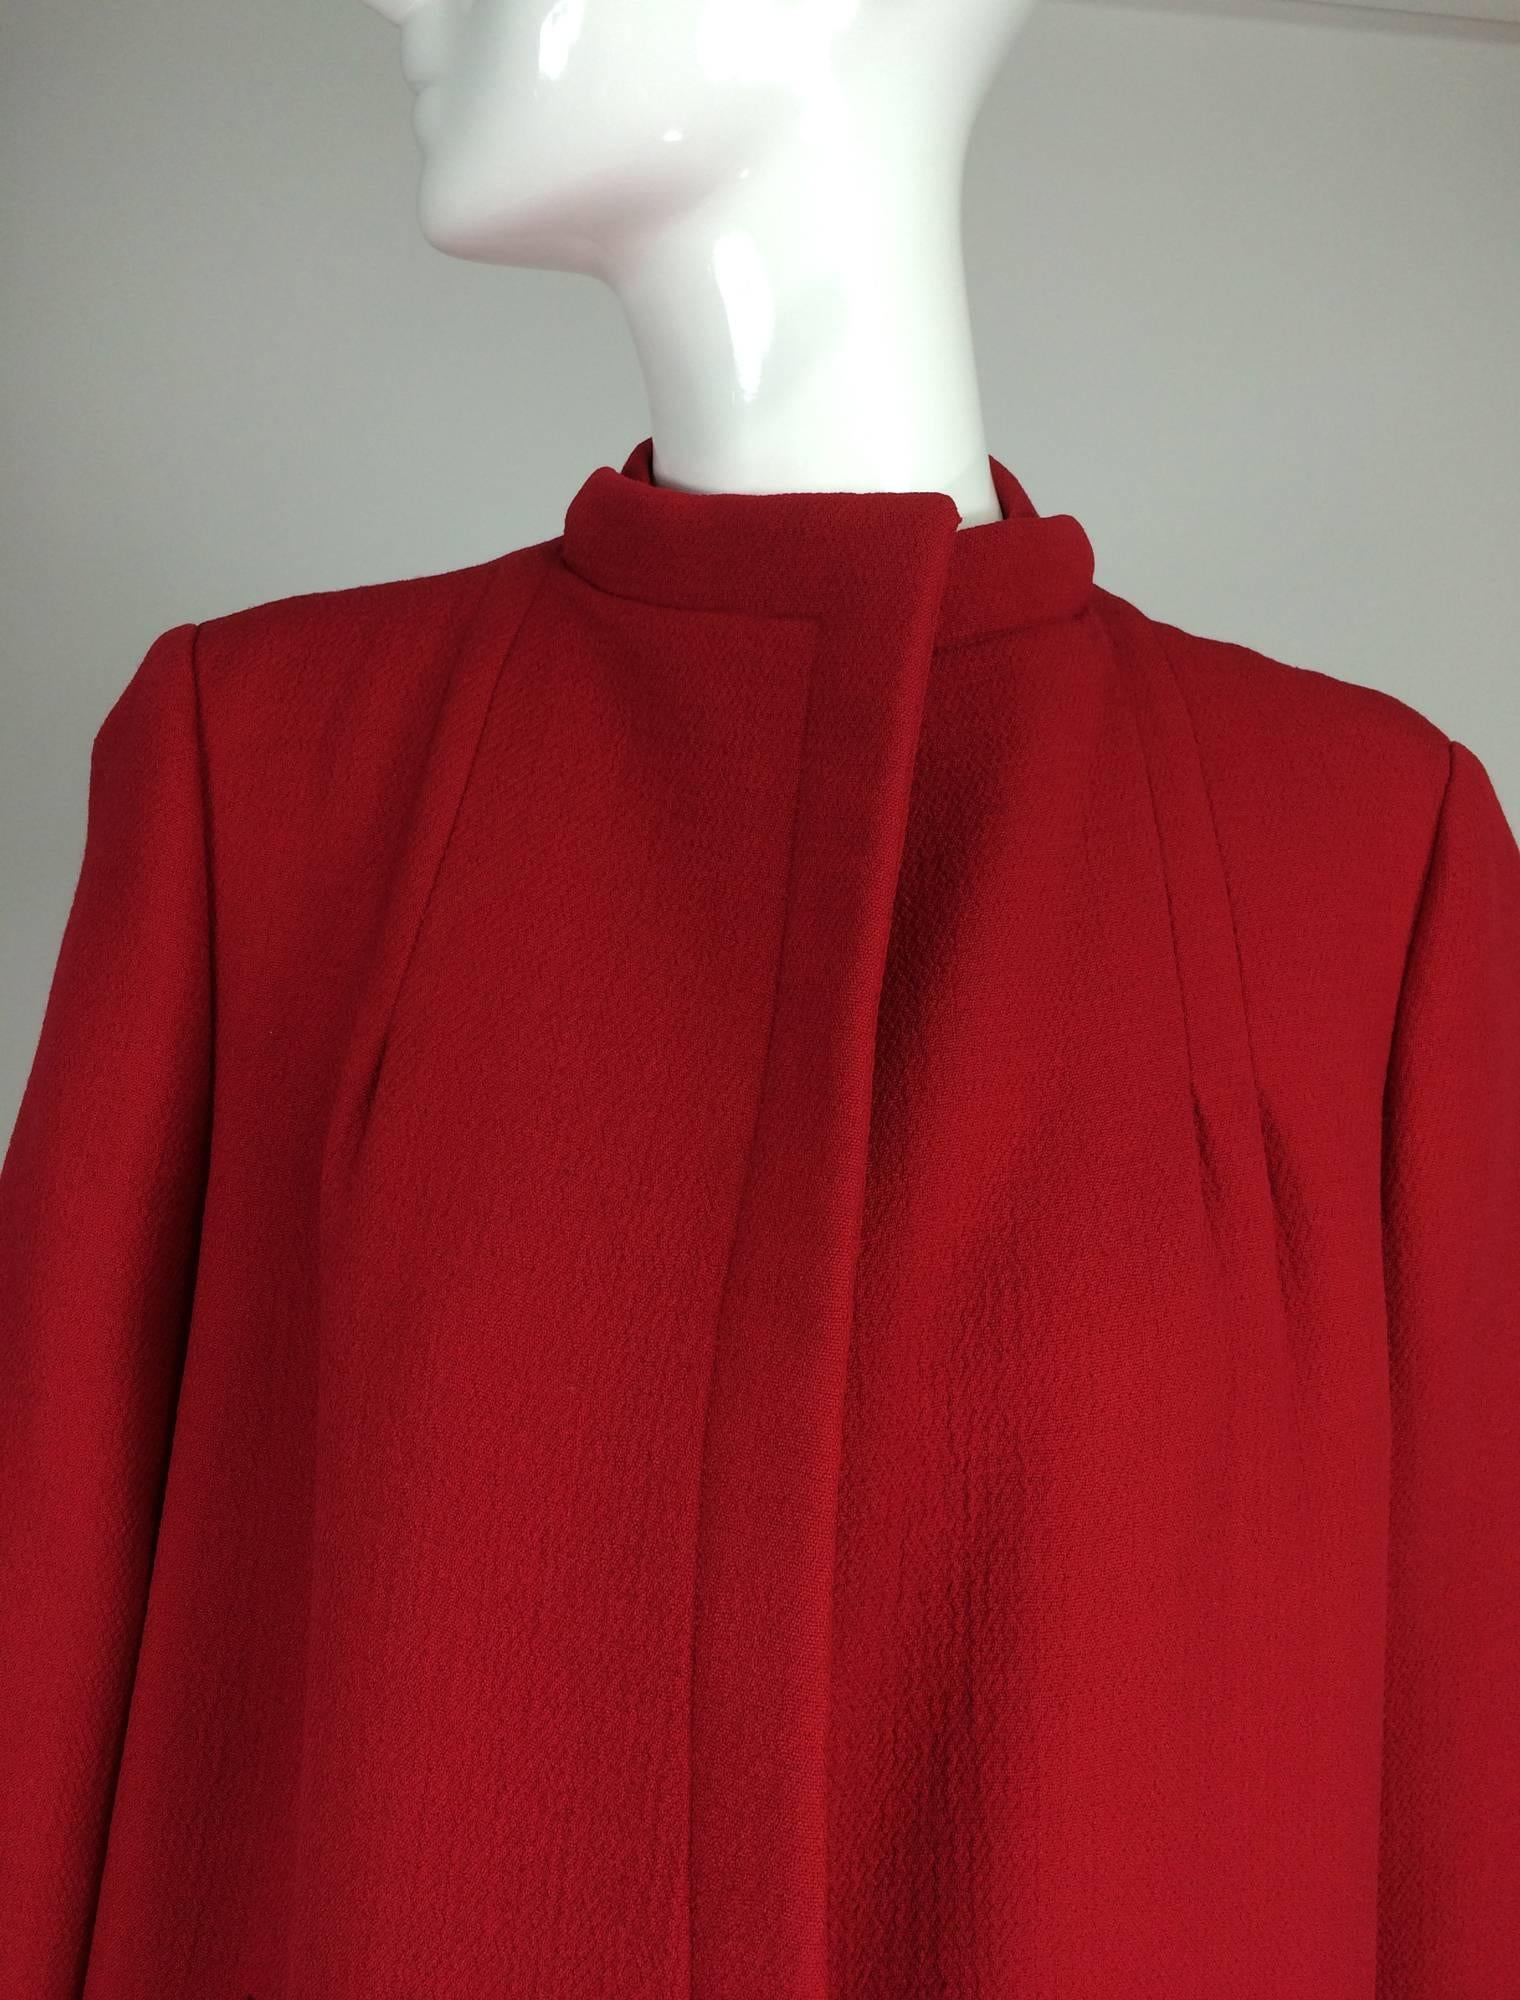 Pauline Trigere chic cherry red wool open front coat 1950s 4